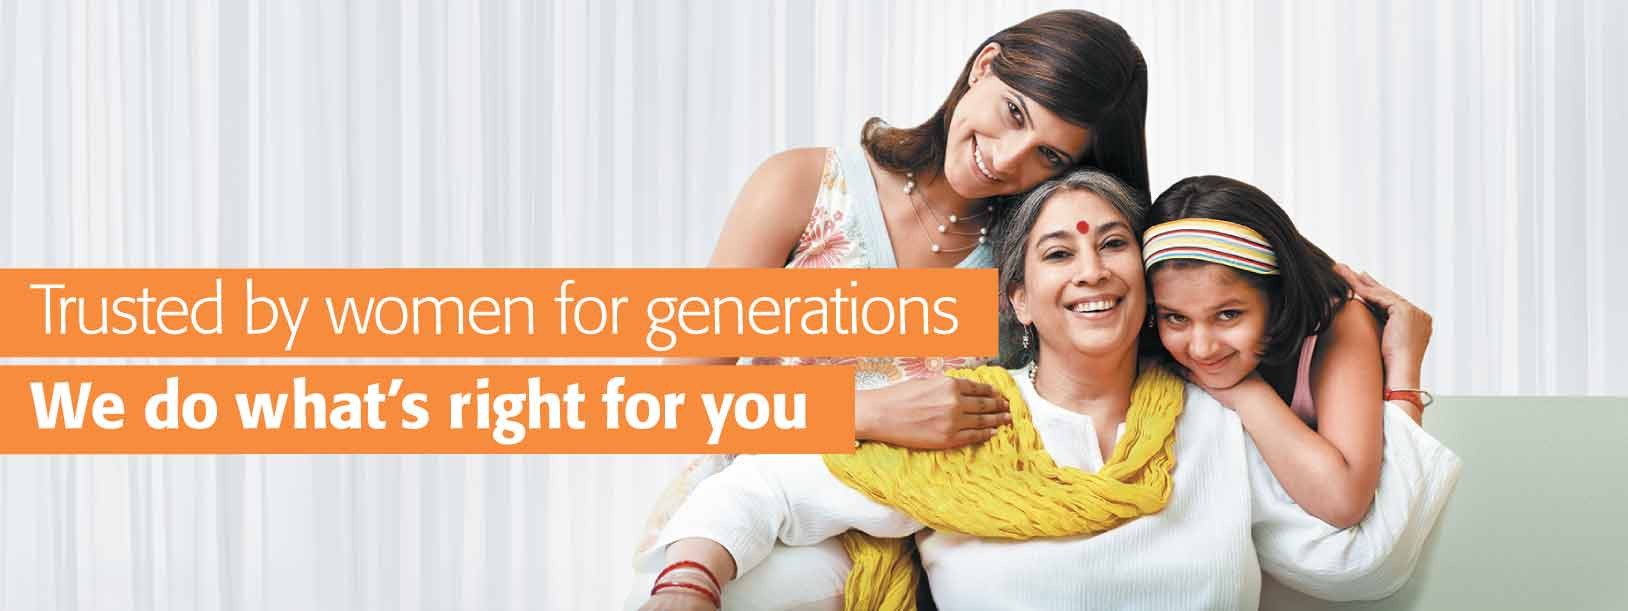 Trusted by women for generations because we do what's right for you